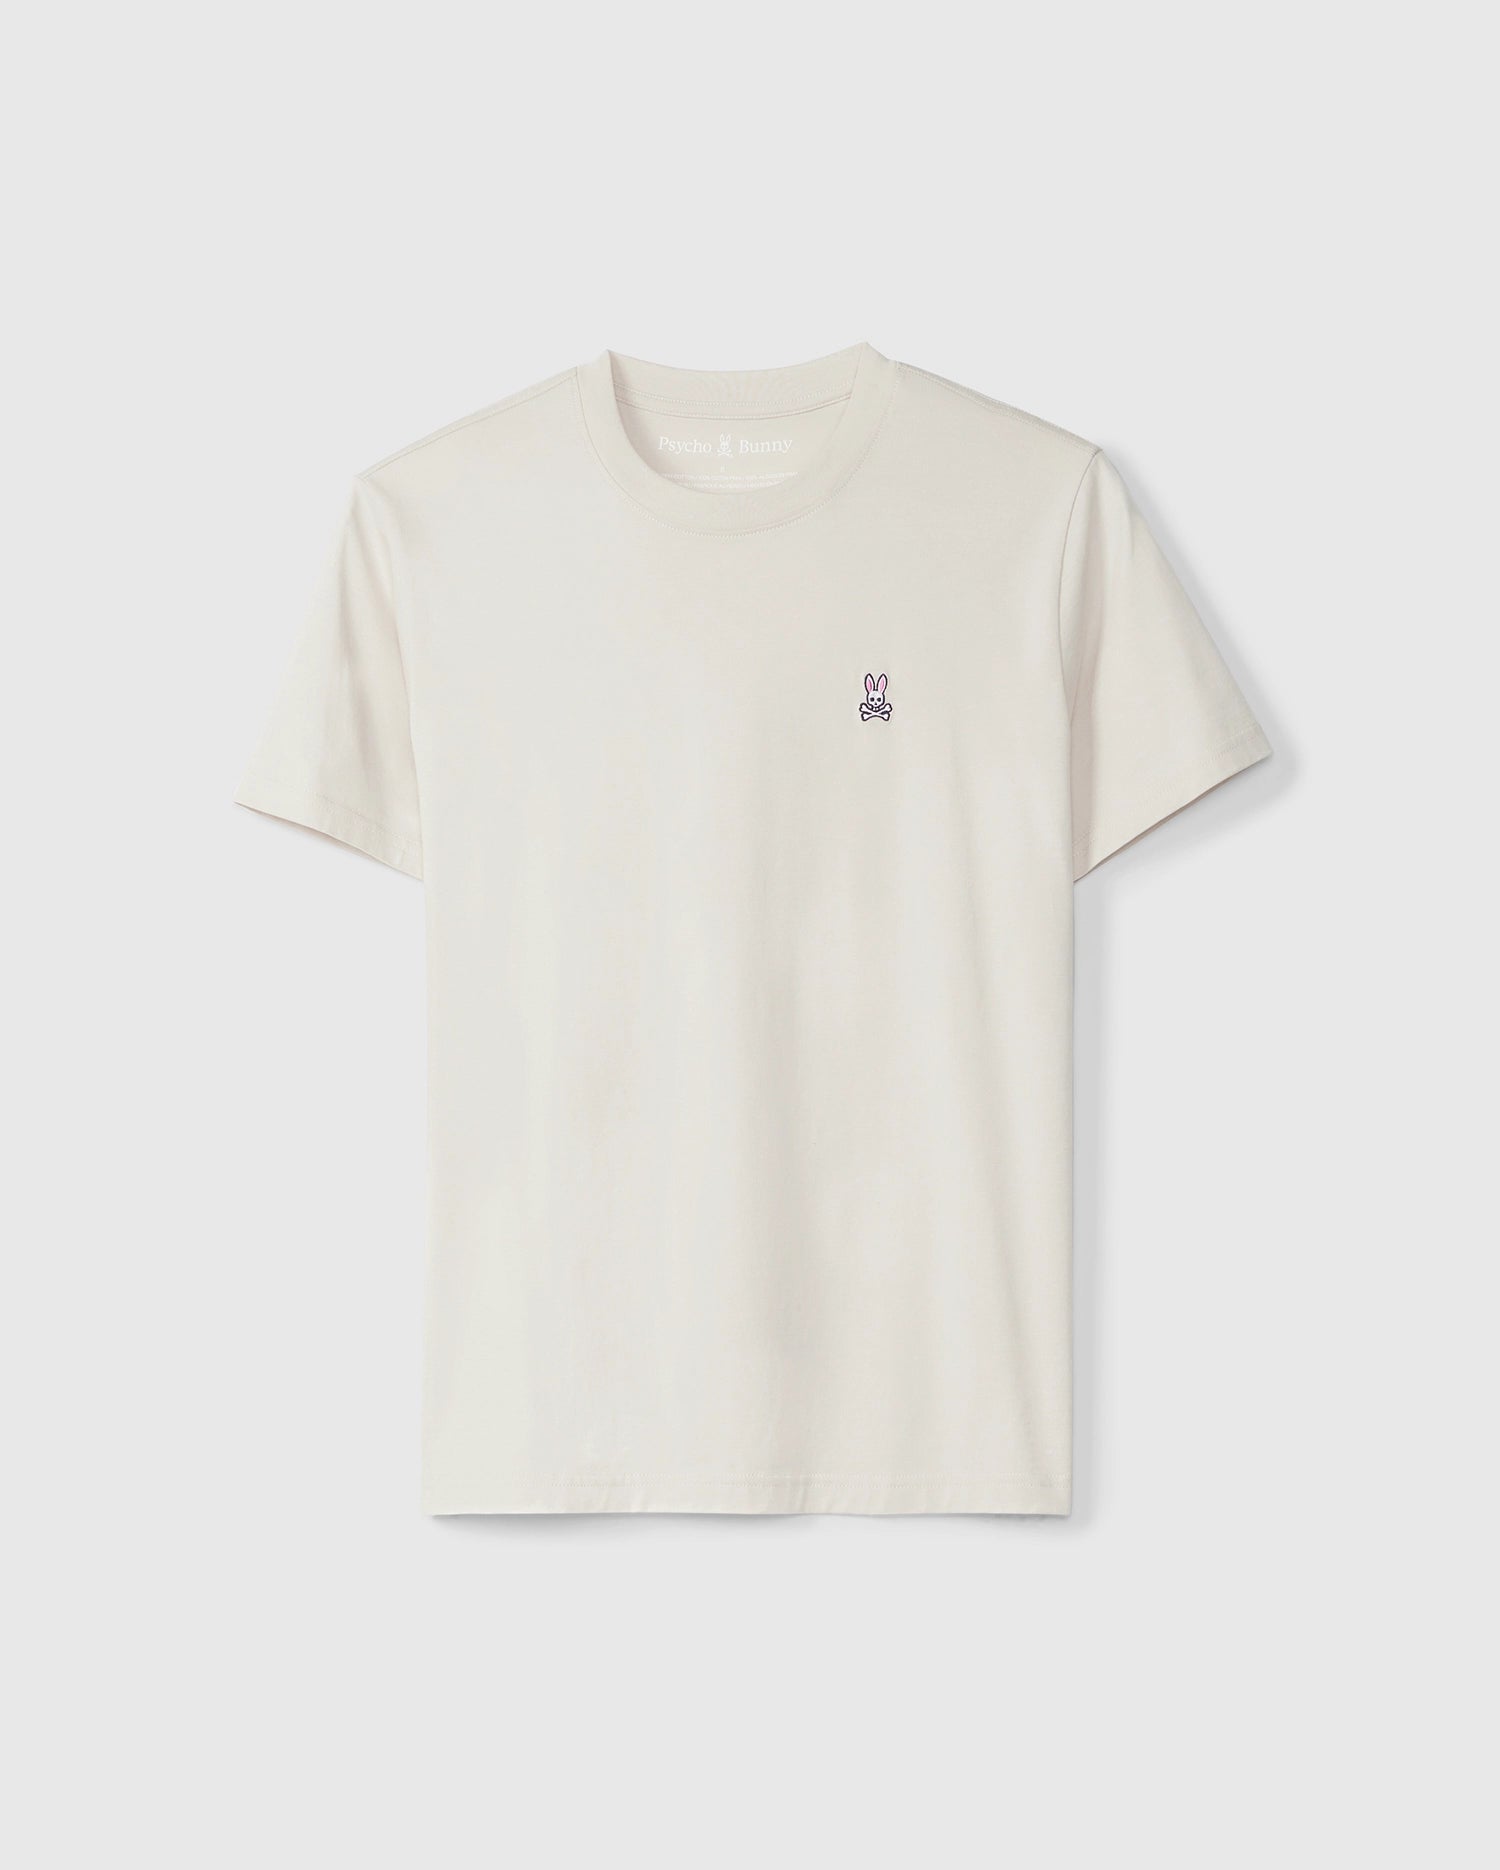 A plain, off-white Psycho Bunny Classic Crew Neck Tee with a small black and white bunny logo embroidered on the chest area, displayed on a light grey background.